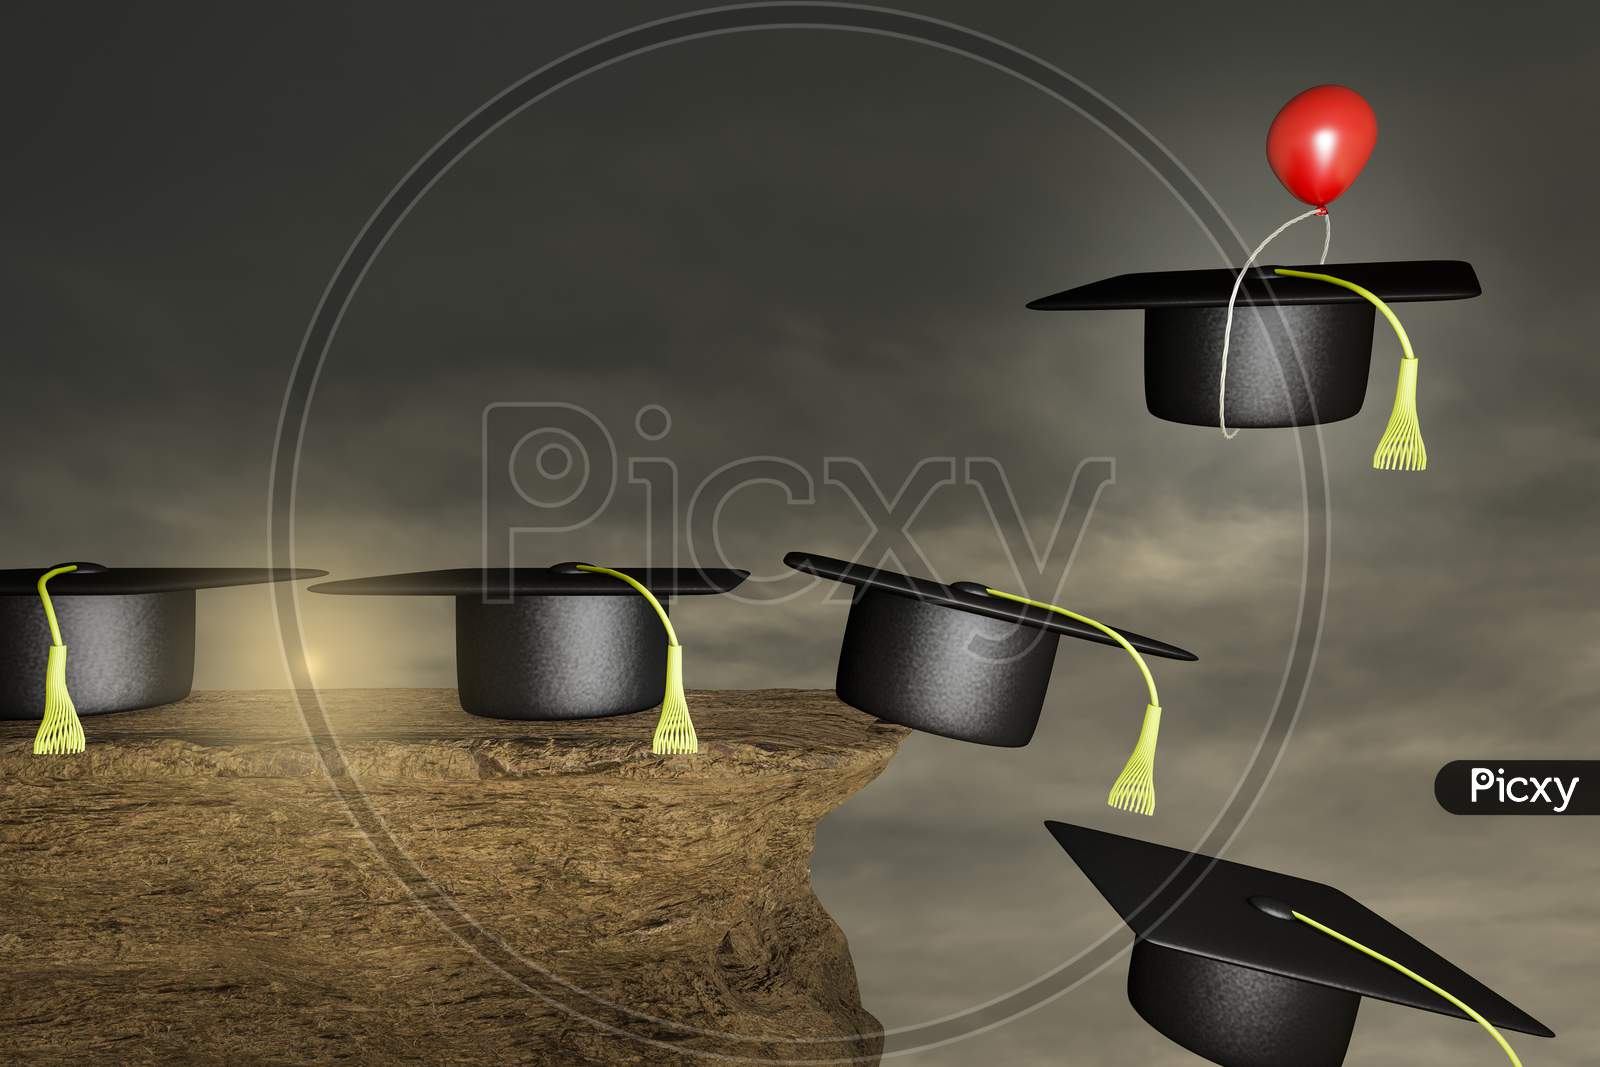 Graduation Hat On A Stone Cliff With A Red Balloon Help To Escape One Graduation Hat From Falling In A Sunset Day. Recognition Or Promotion Day Or Best Speeches At Graduation Concept. 3D Illustration